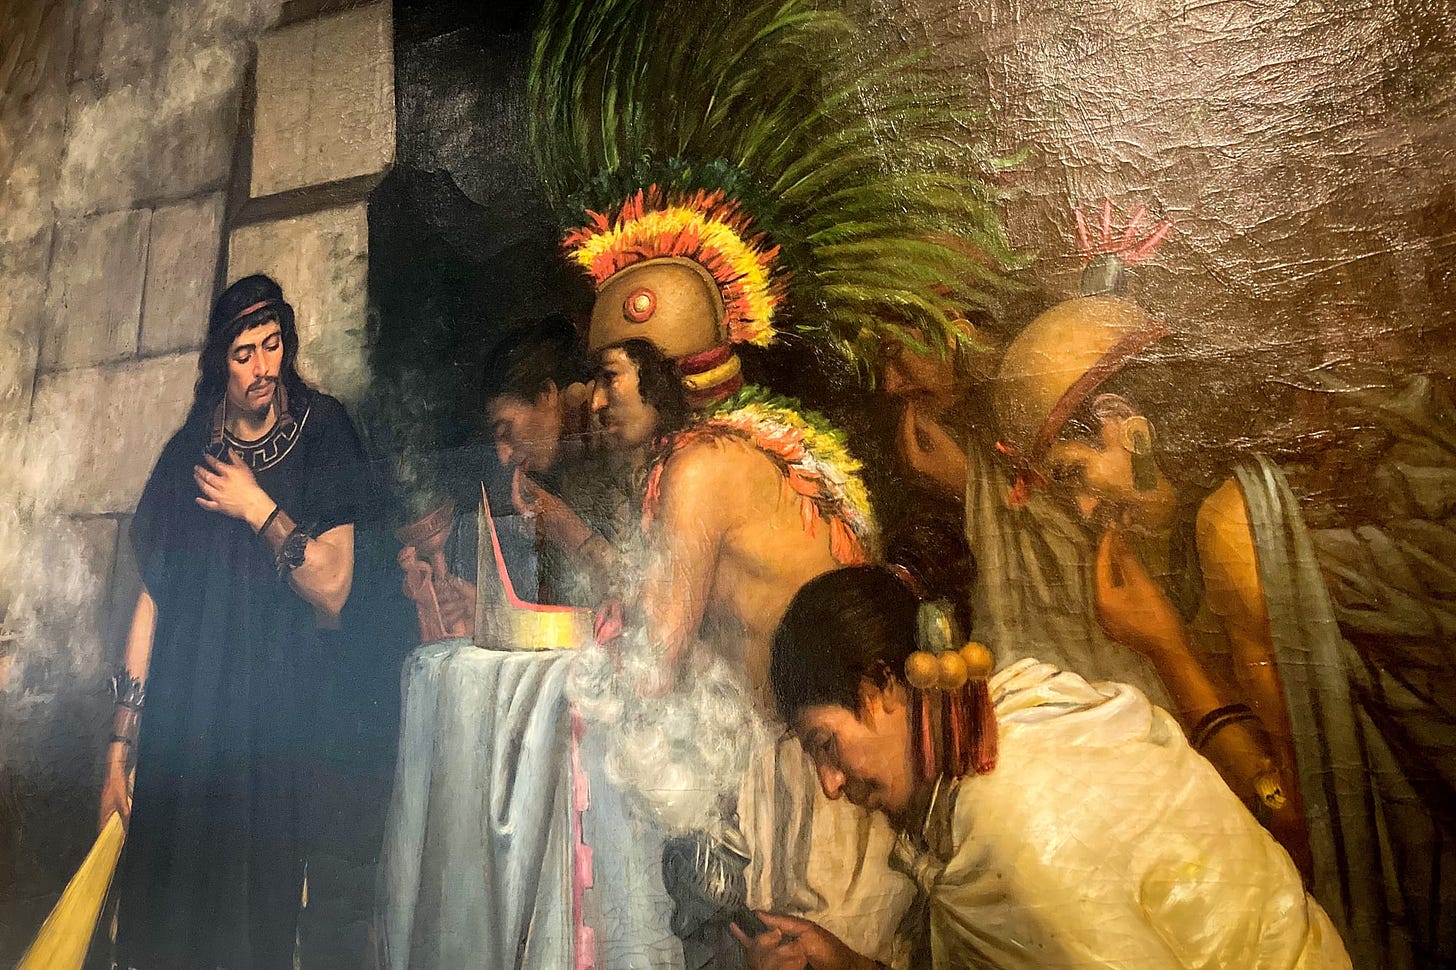 Go see the Aztecs! A Christmas story from Tepoztlán and a New Year's Message